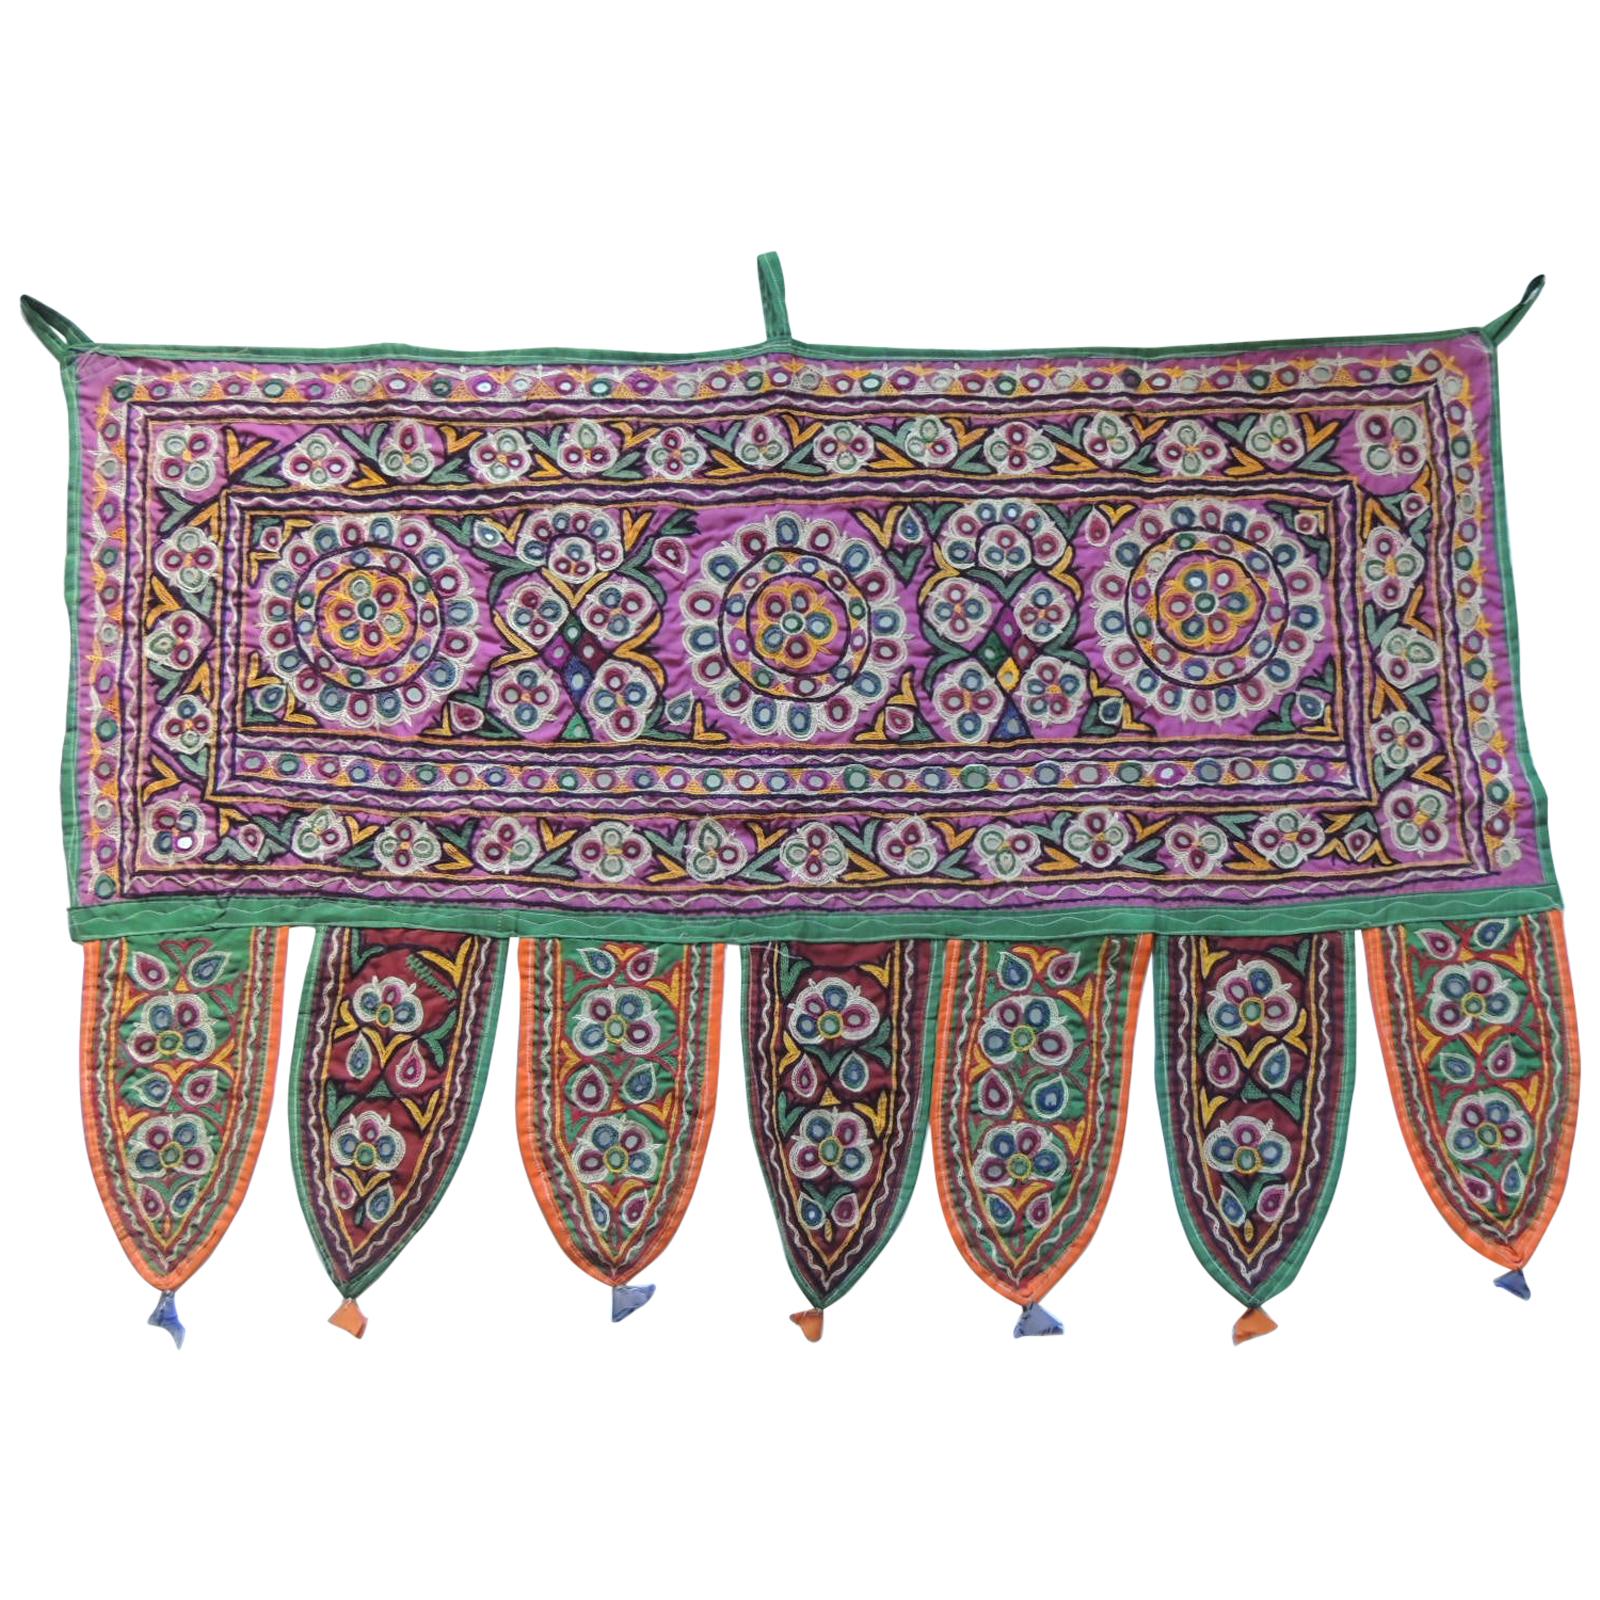 Vintage Indian Embroidered TORAN with Mirror-Work